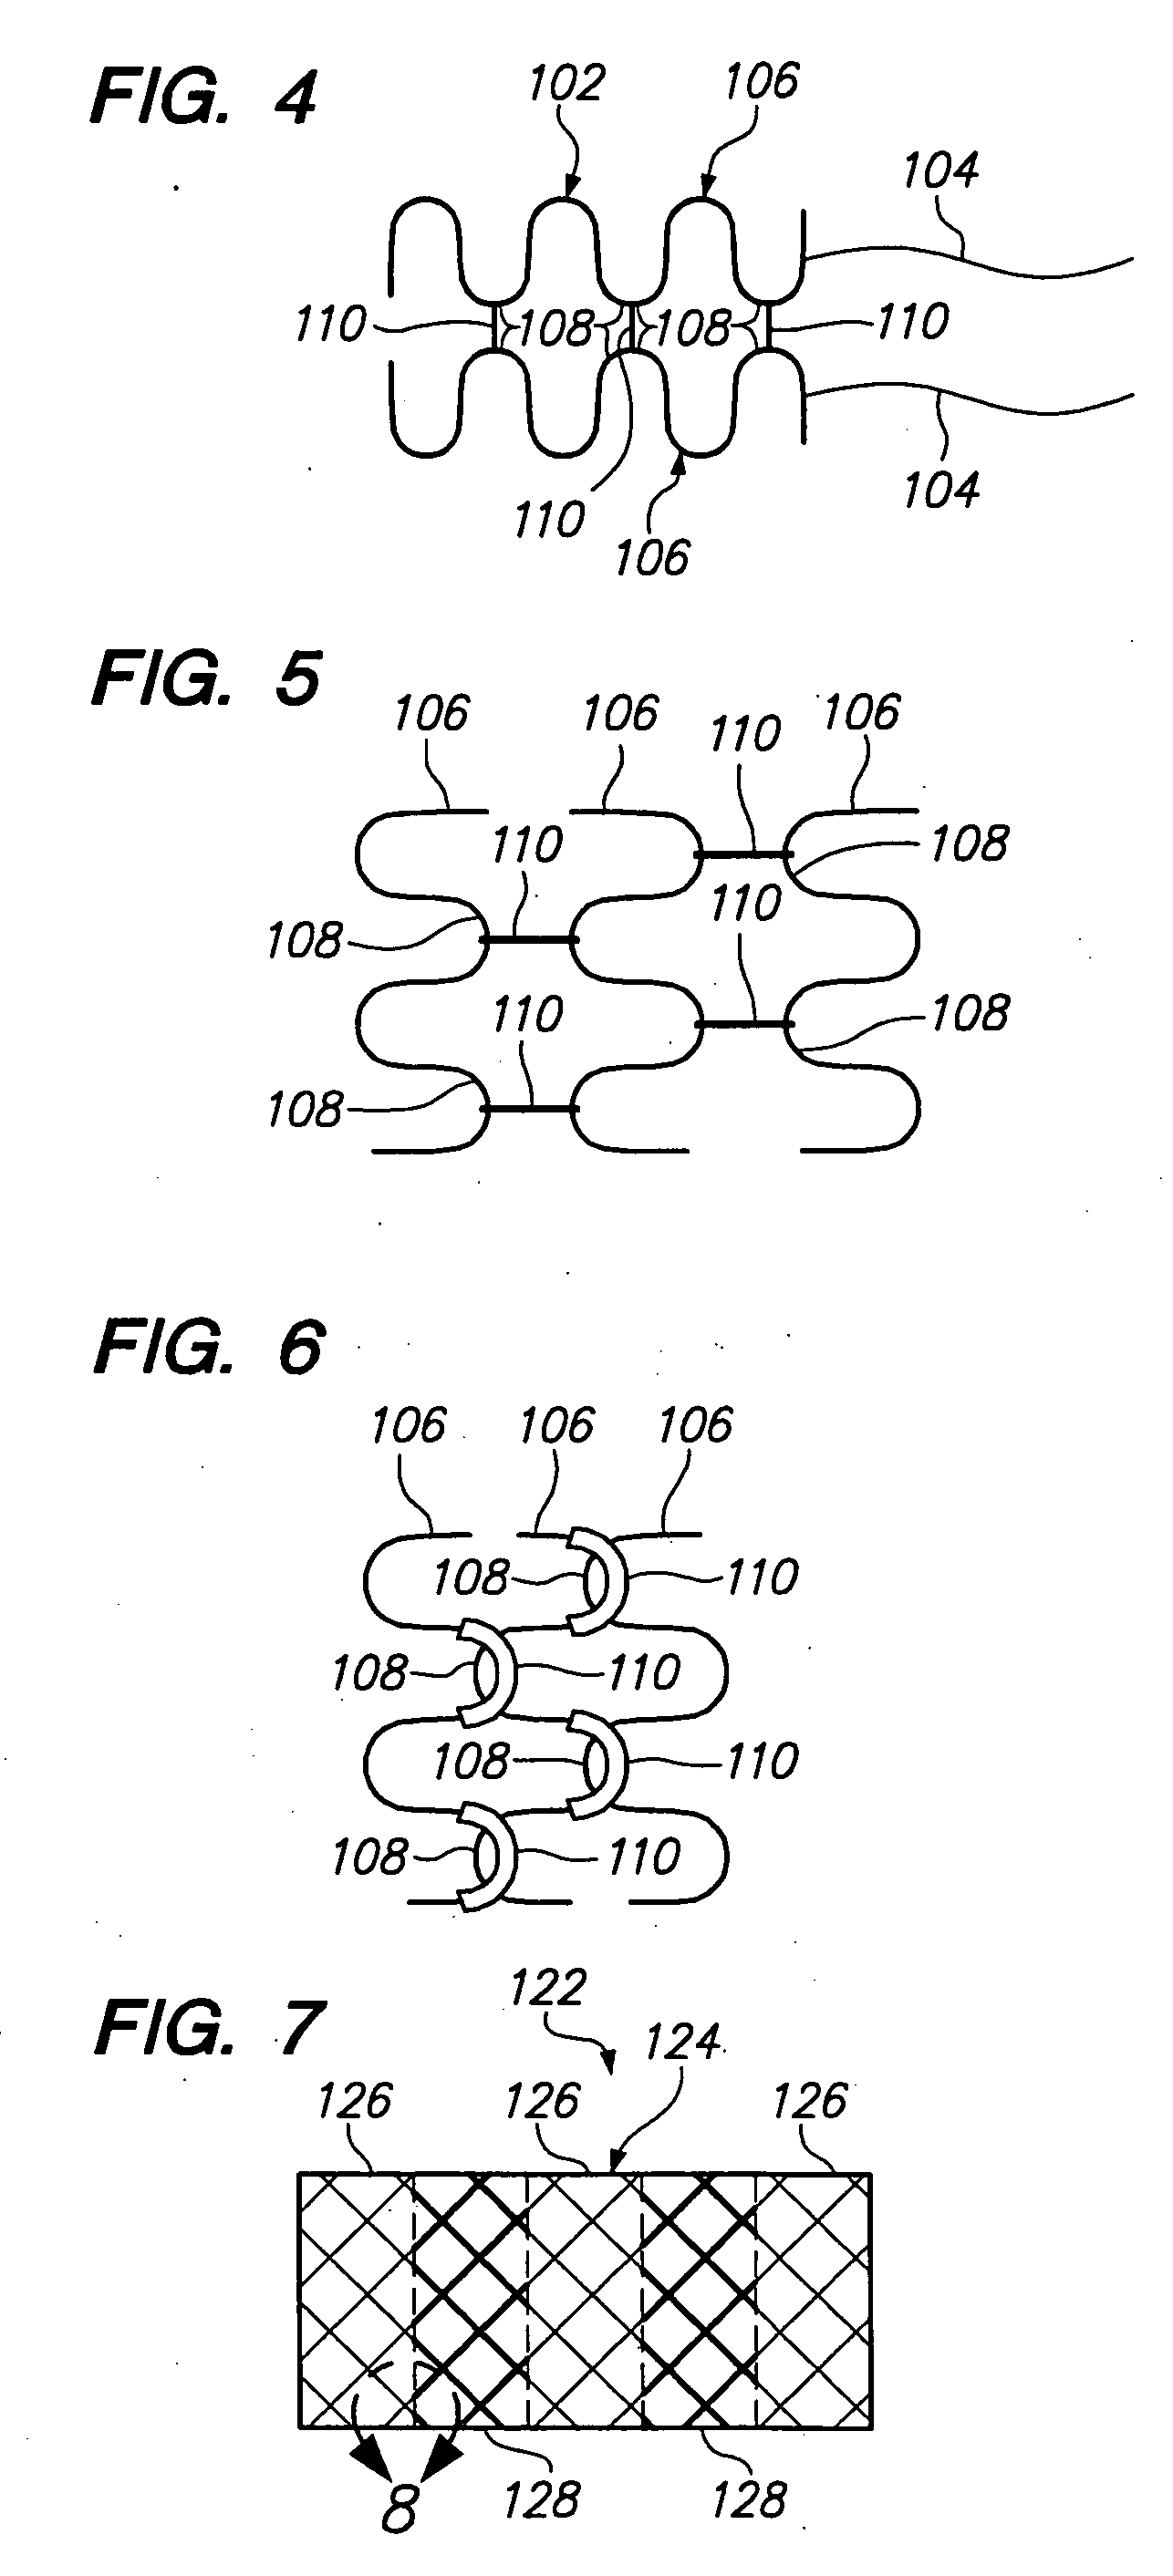 Intravascular self-anchoring electrode body with springs loops or arms